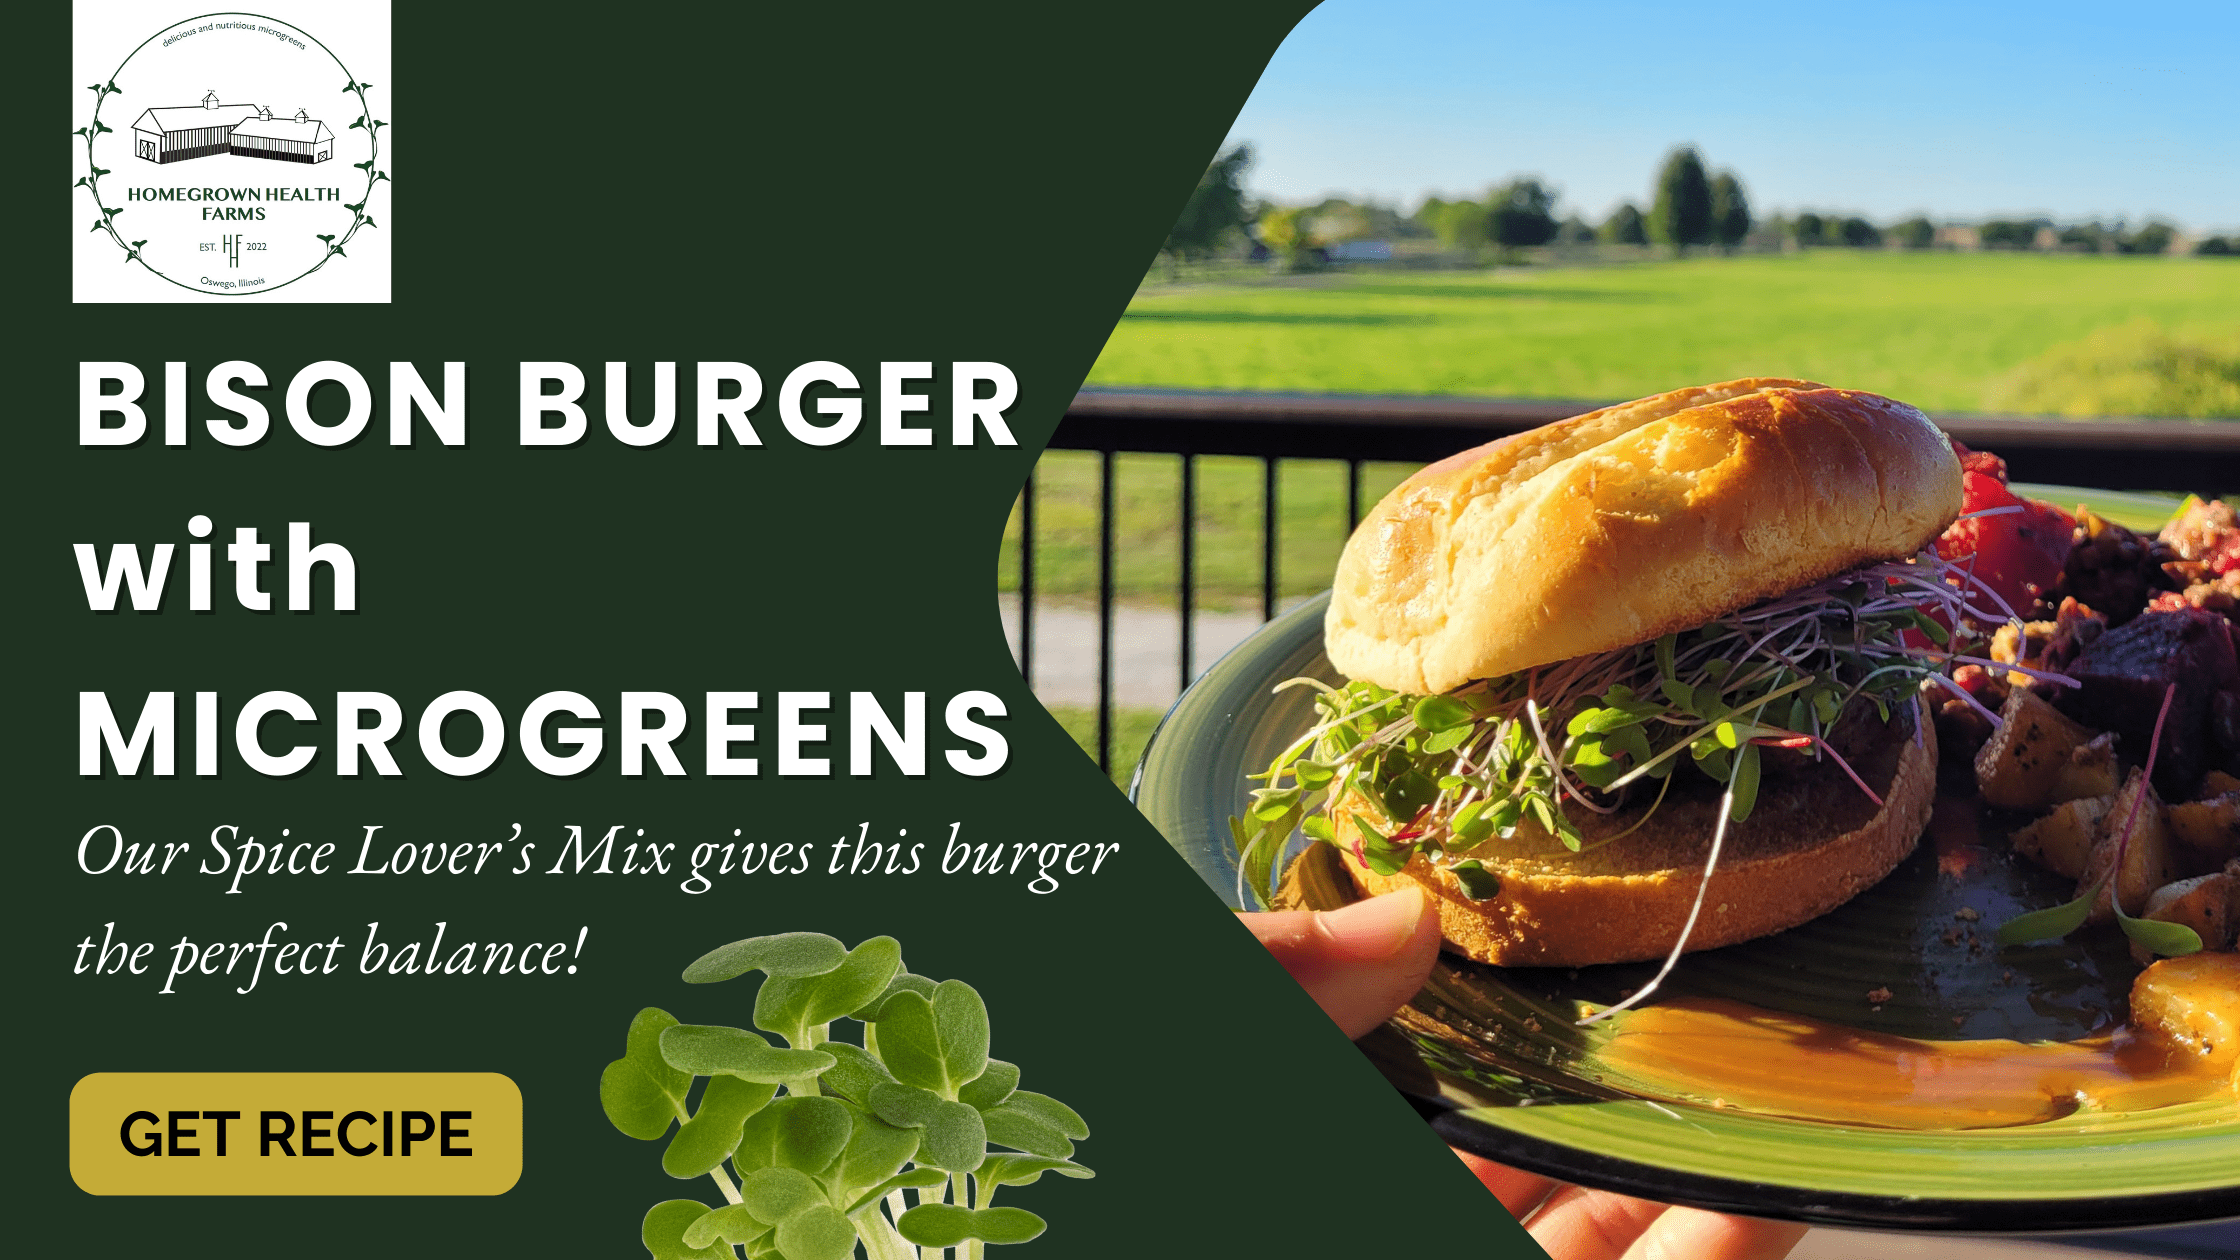 Bison Burger with microgreens Recipe